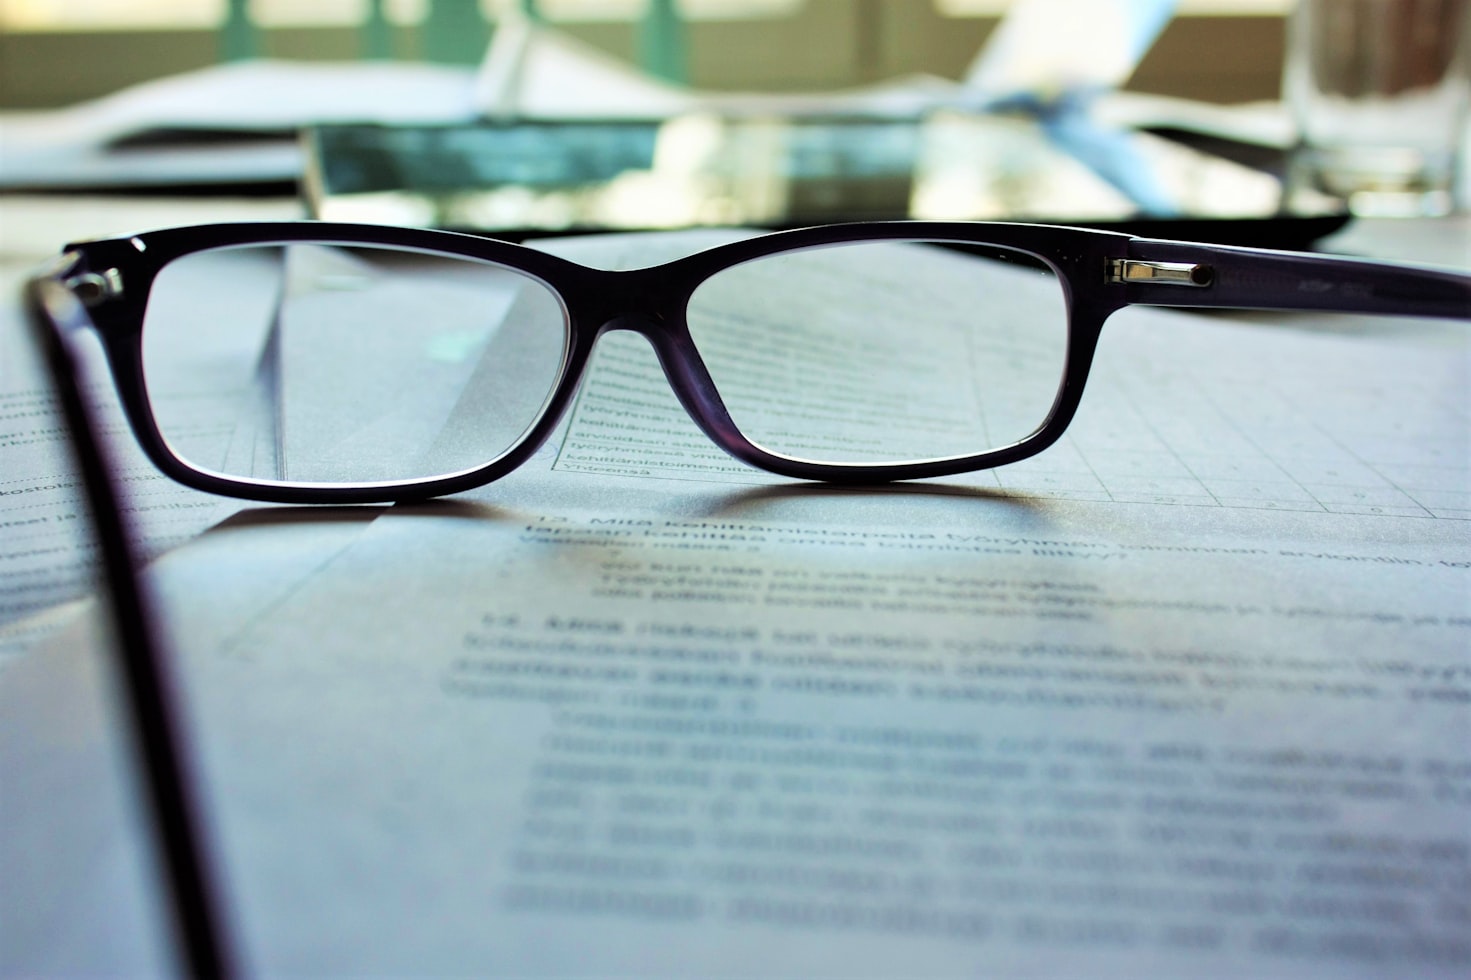 Close-up shot of a pair of black glasses sitting on top of documents. Make sure to read contracts carefully before agreeing to global work and travel opportunities.